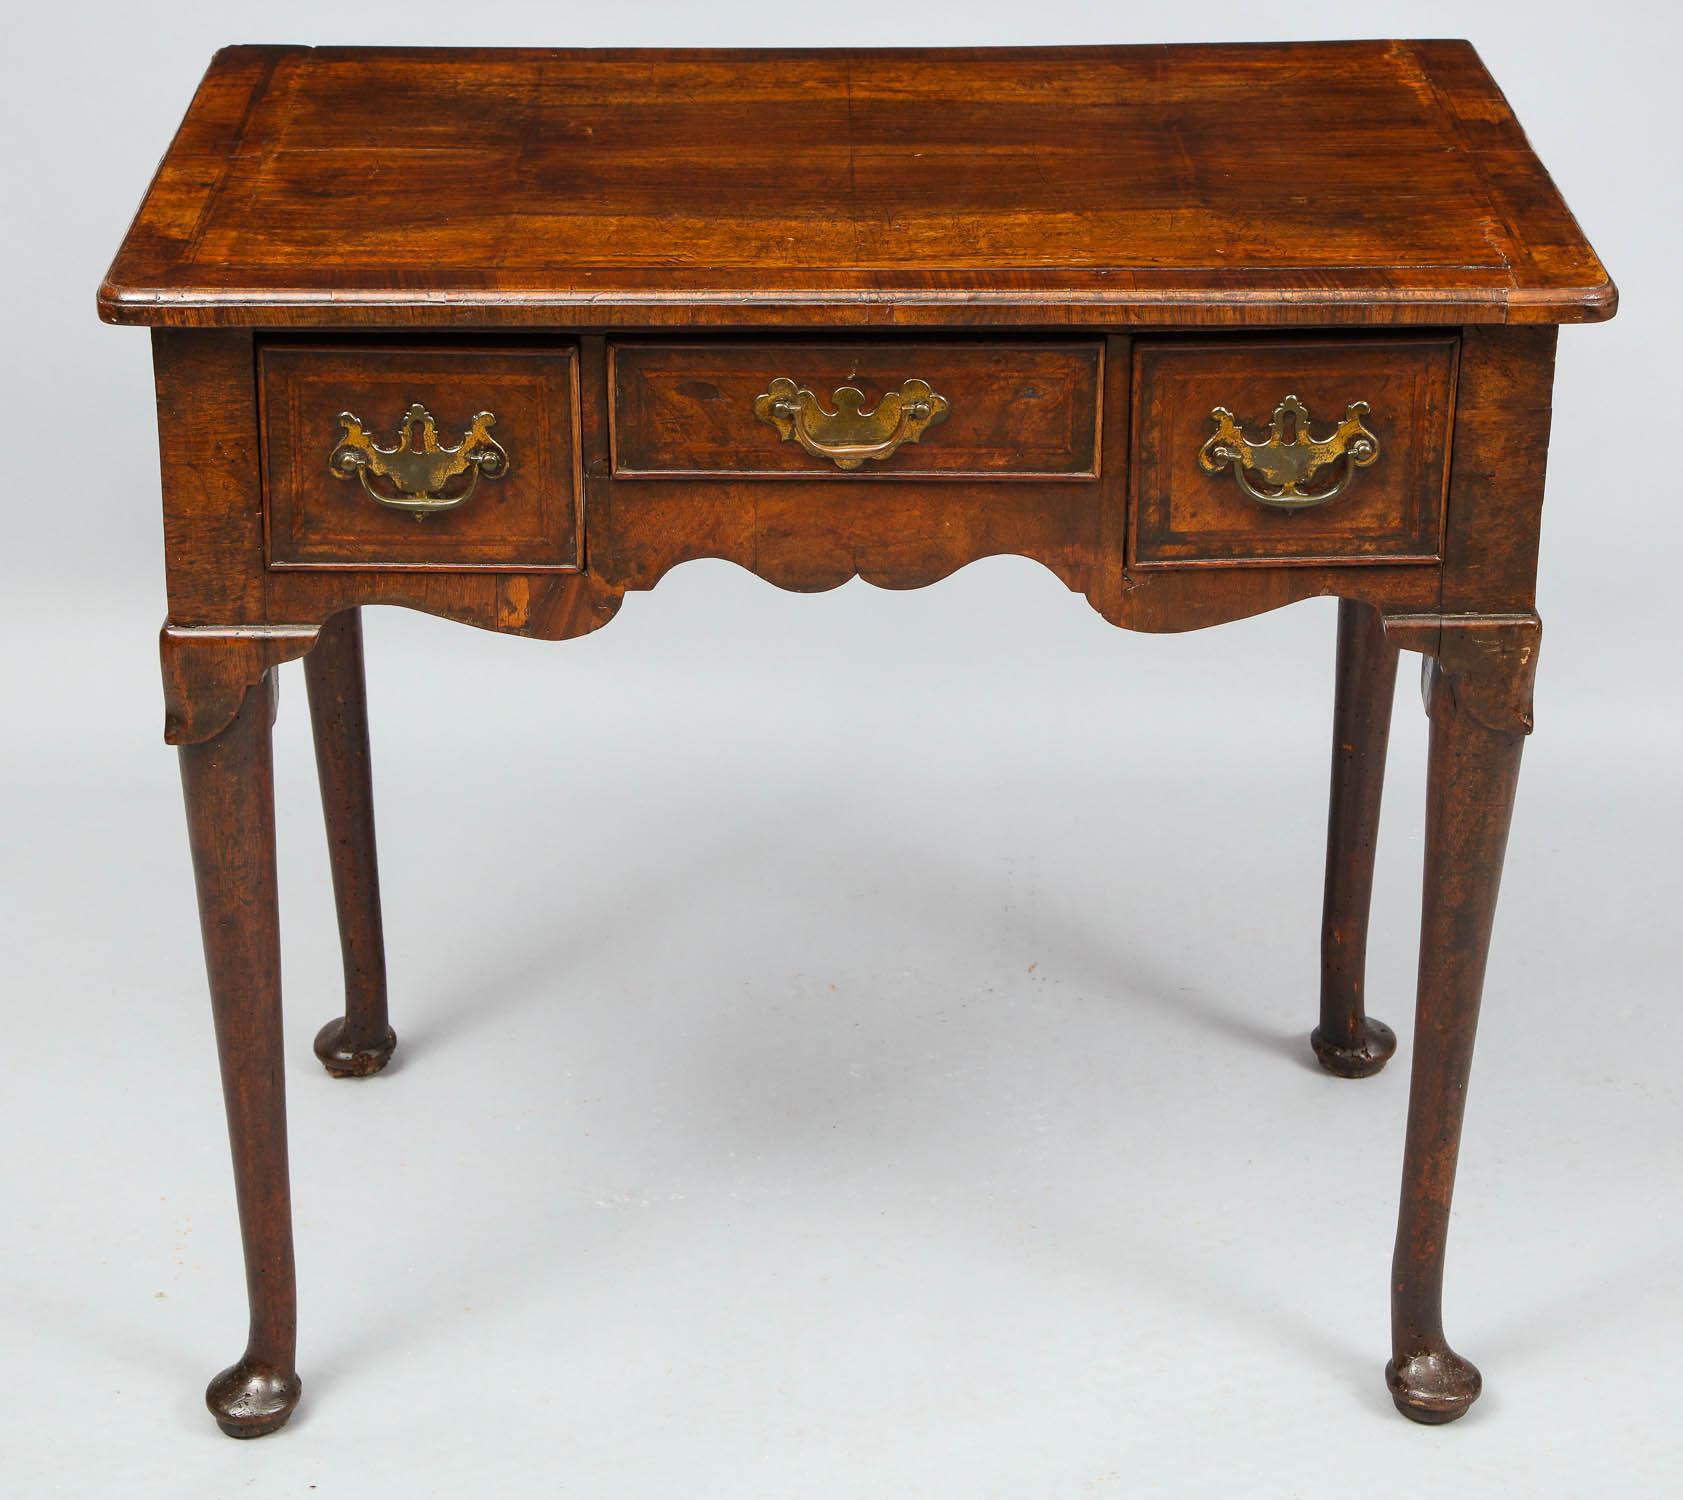 Fine early 18th century English walnut lowboy, the book-matched top with herringbone inlay and cross banding, with molded edge over two short and one longer drawer over scalloped apron, the legs with lappet knees and pad feet, the whole possessing